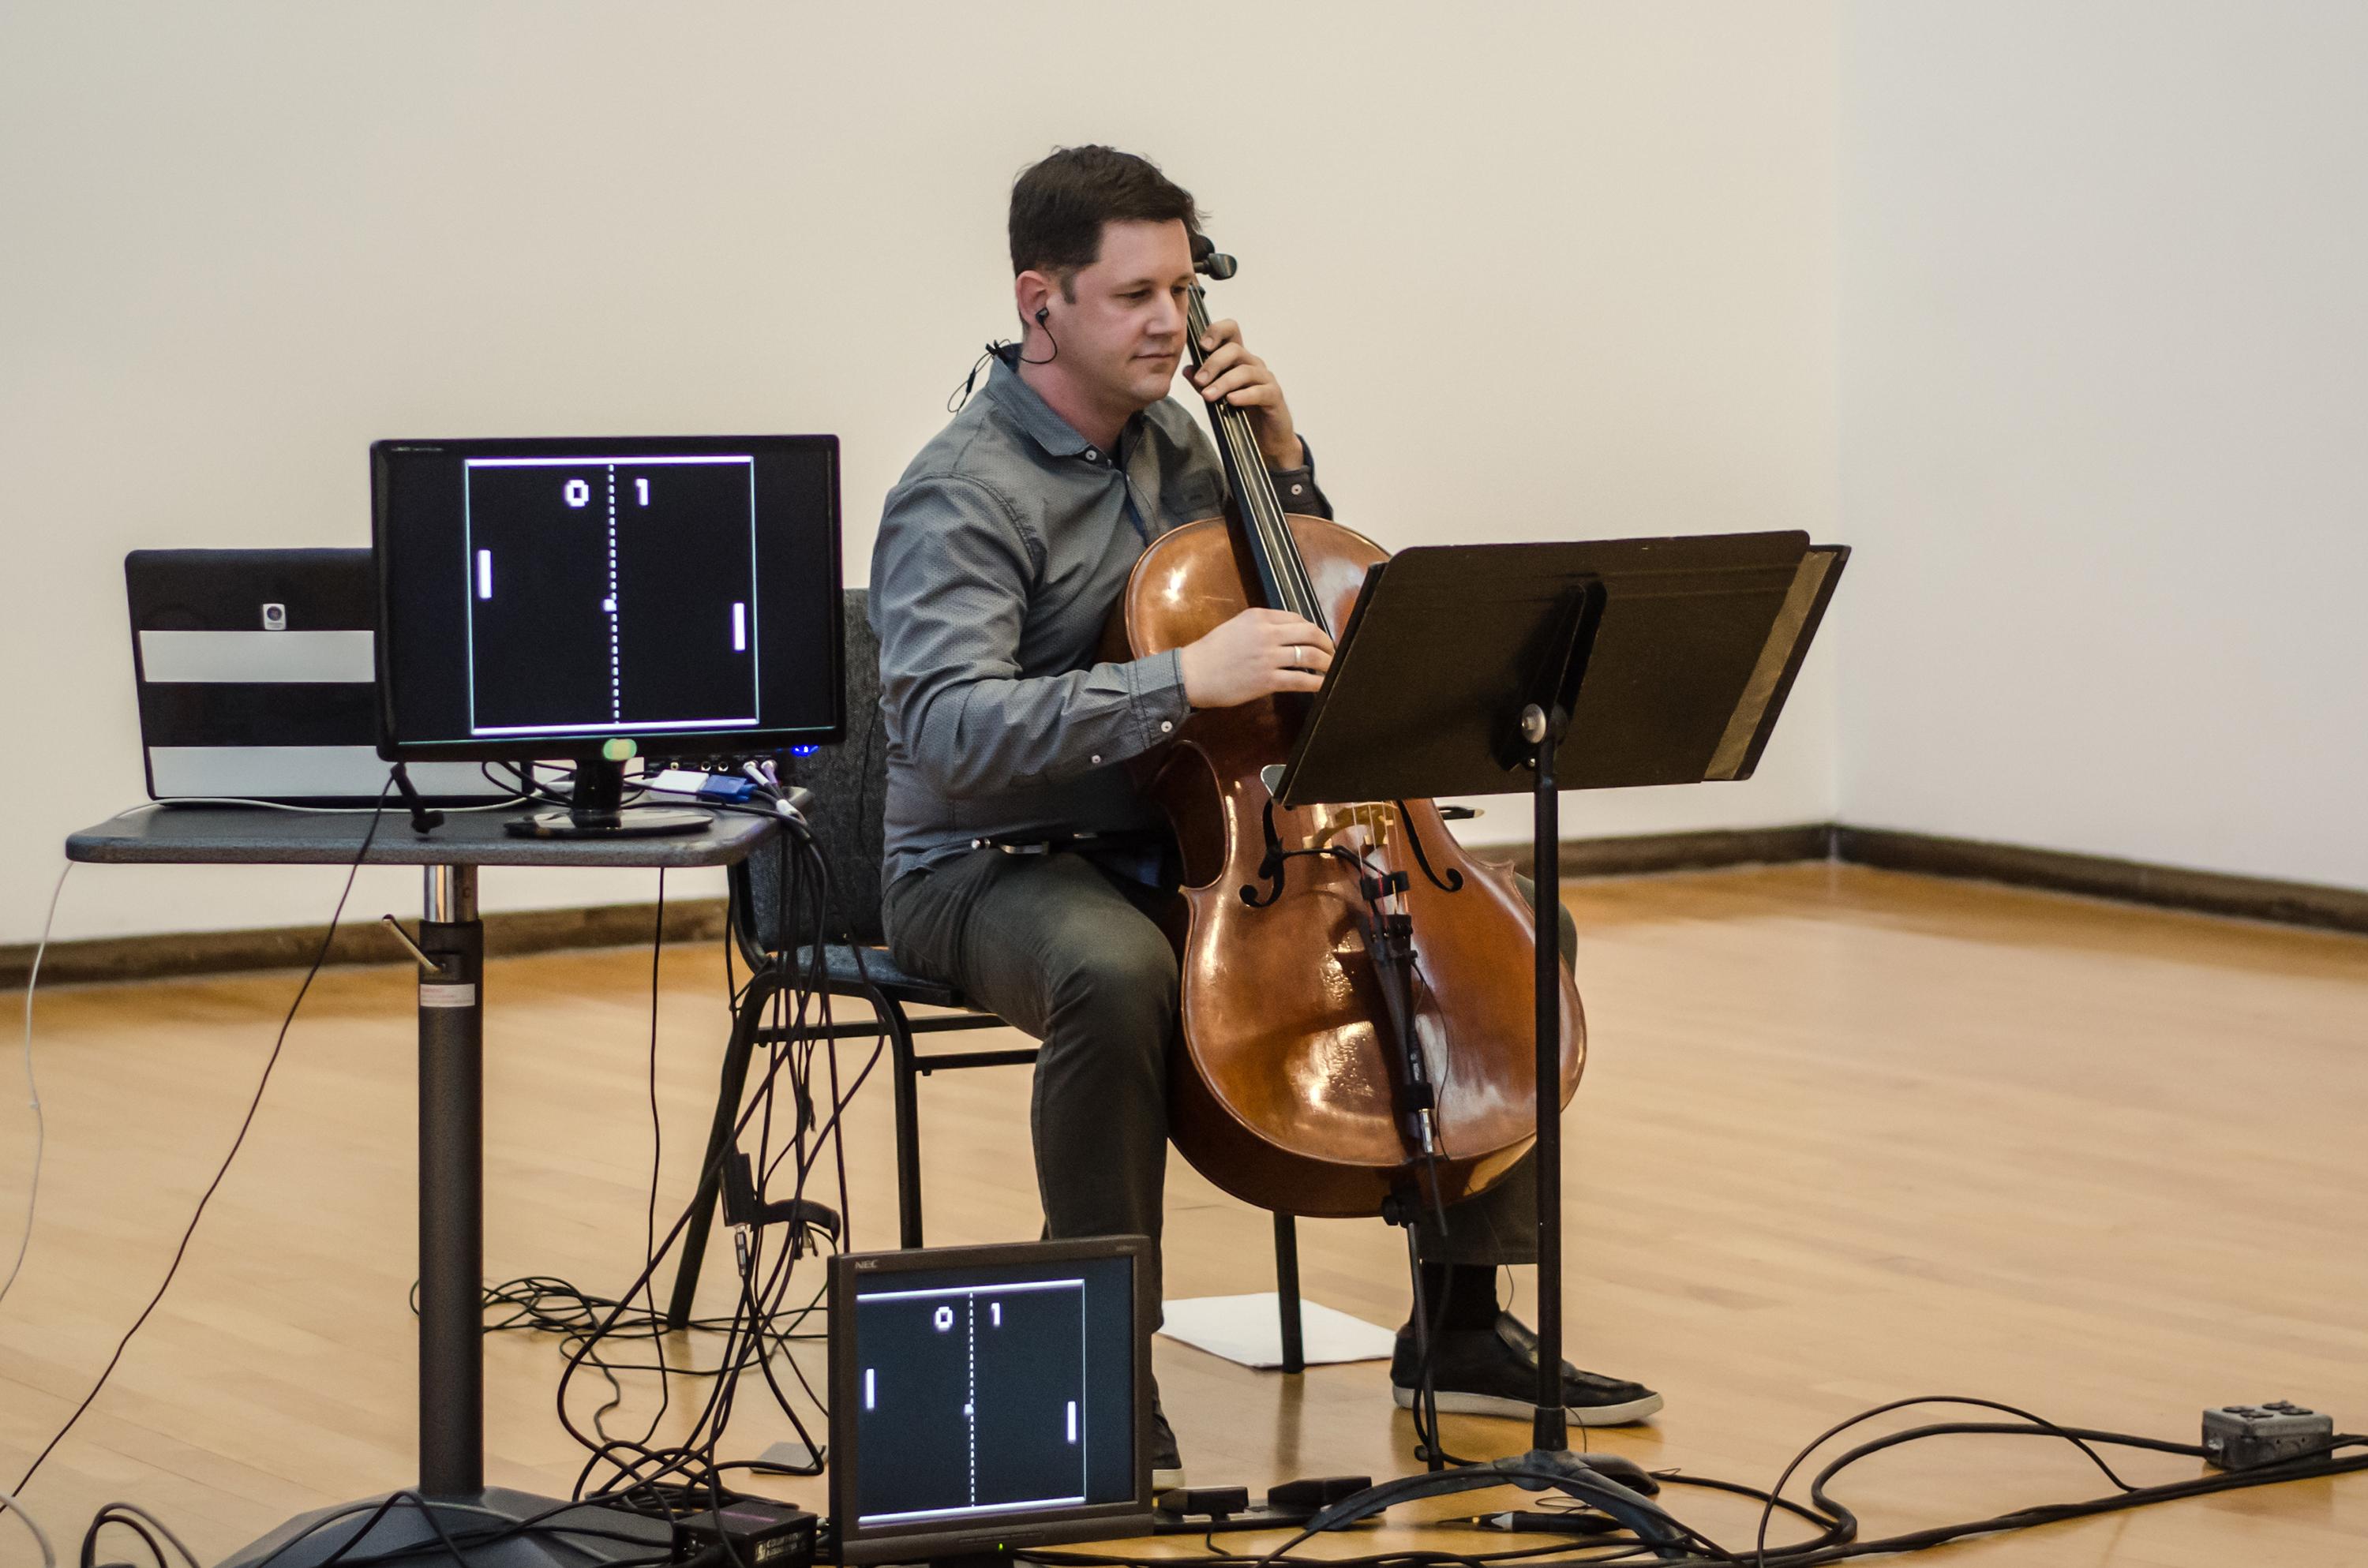 Video still of a man playing cello in front of a music stand next to two computer monitors.